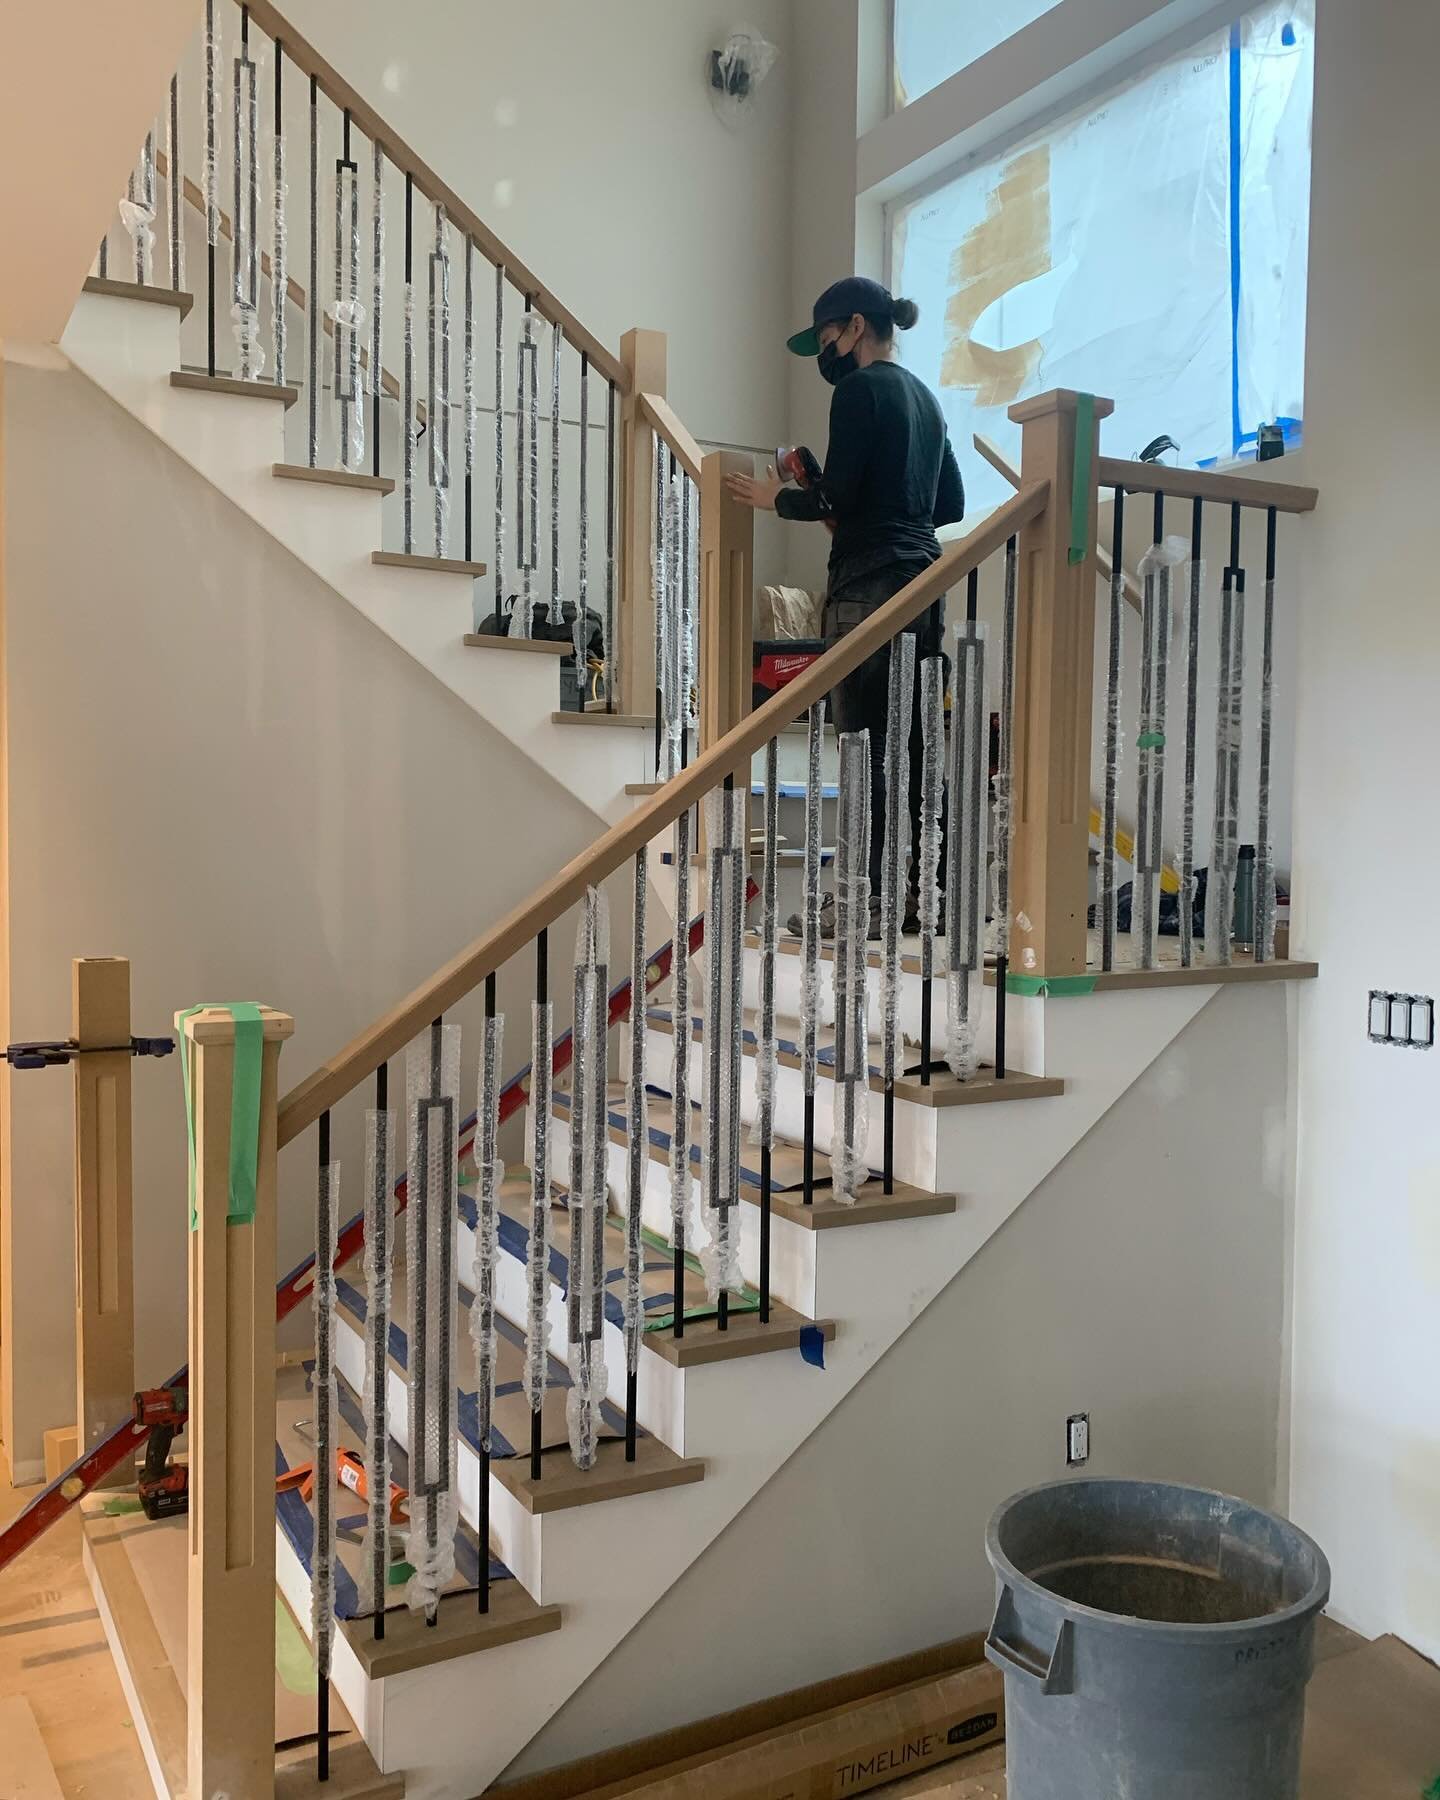 Another day, another handrail being finished up! Railings are just one of our specialties. This sleek addition not only enhances safety but also elevates the overall aesthetic of the space. Crafting safety with style- that&rsquo;s our commitment. #ha